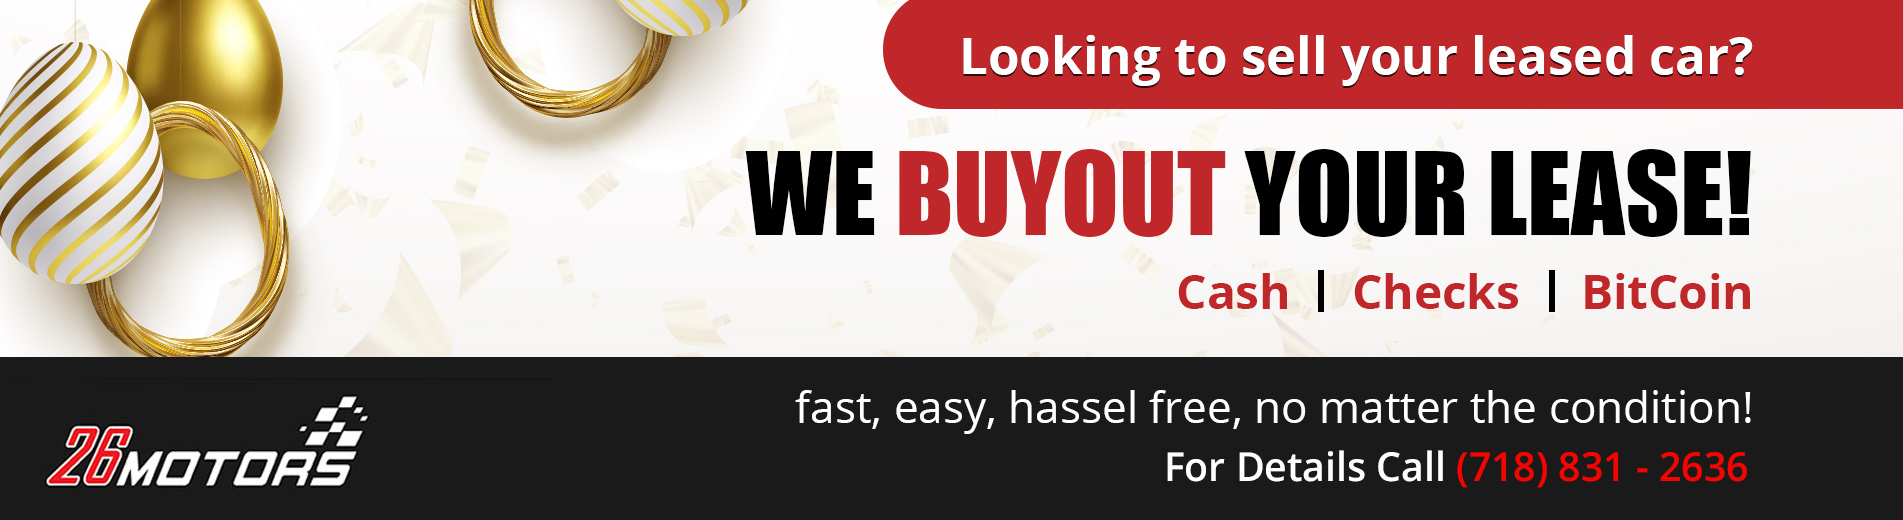 We Buyout Your Lease!